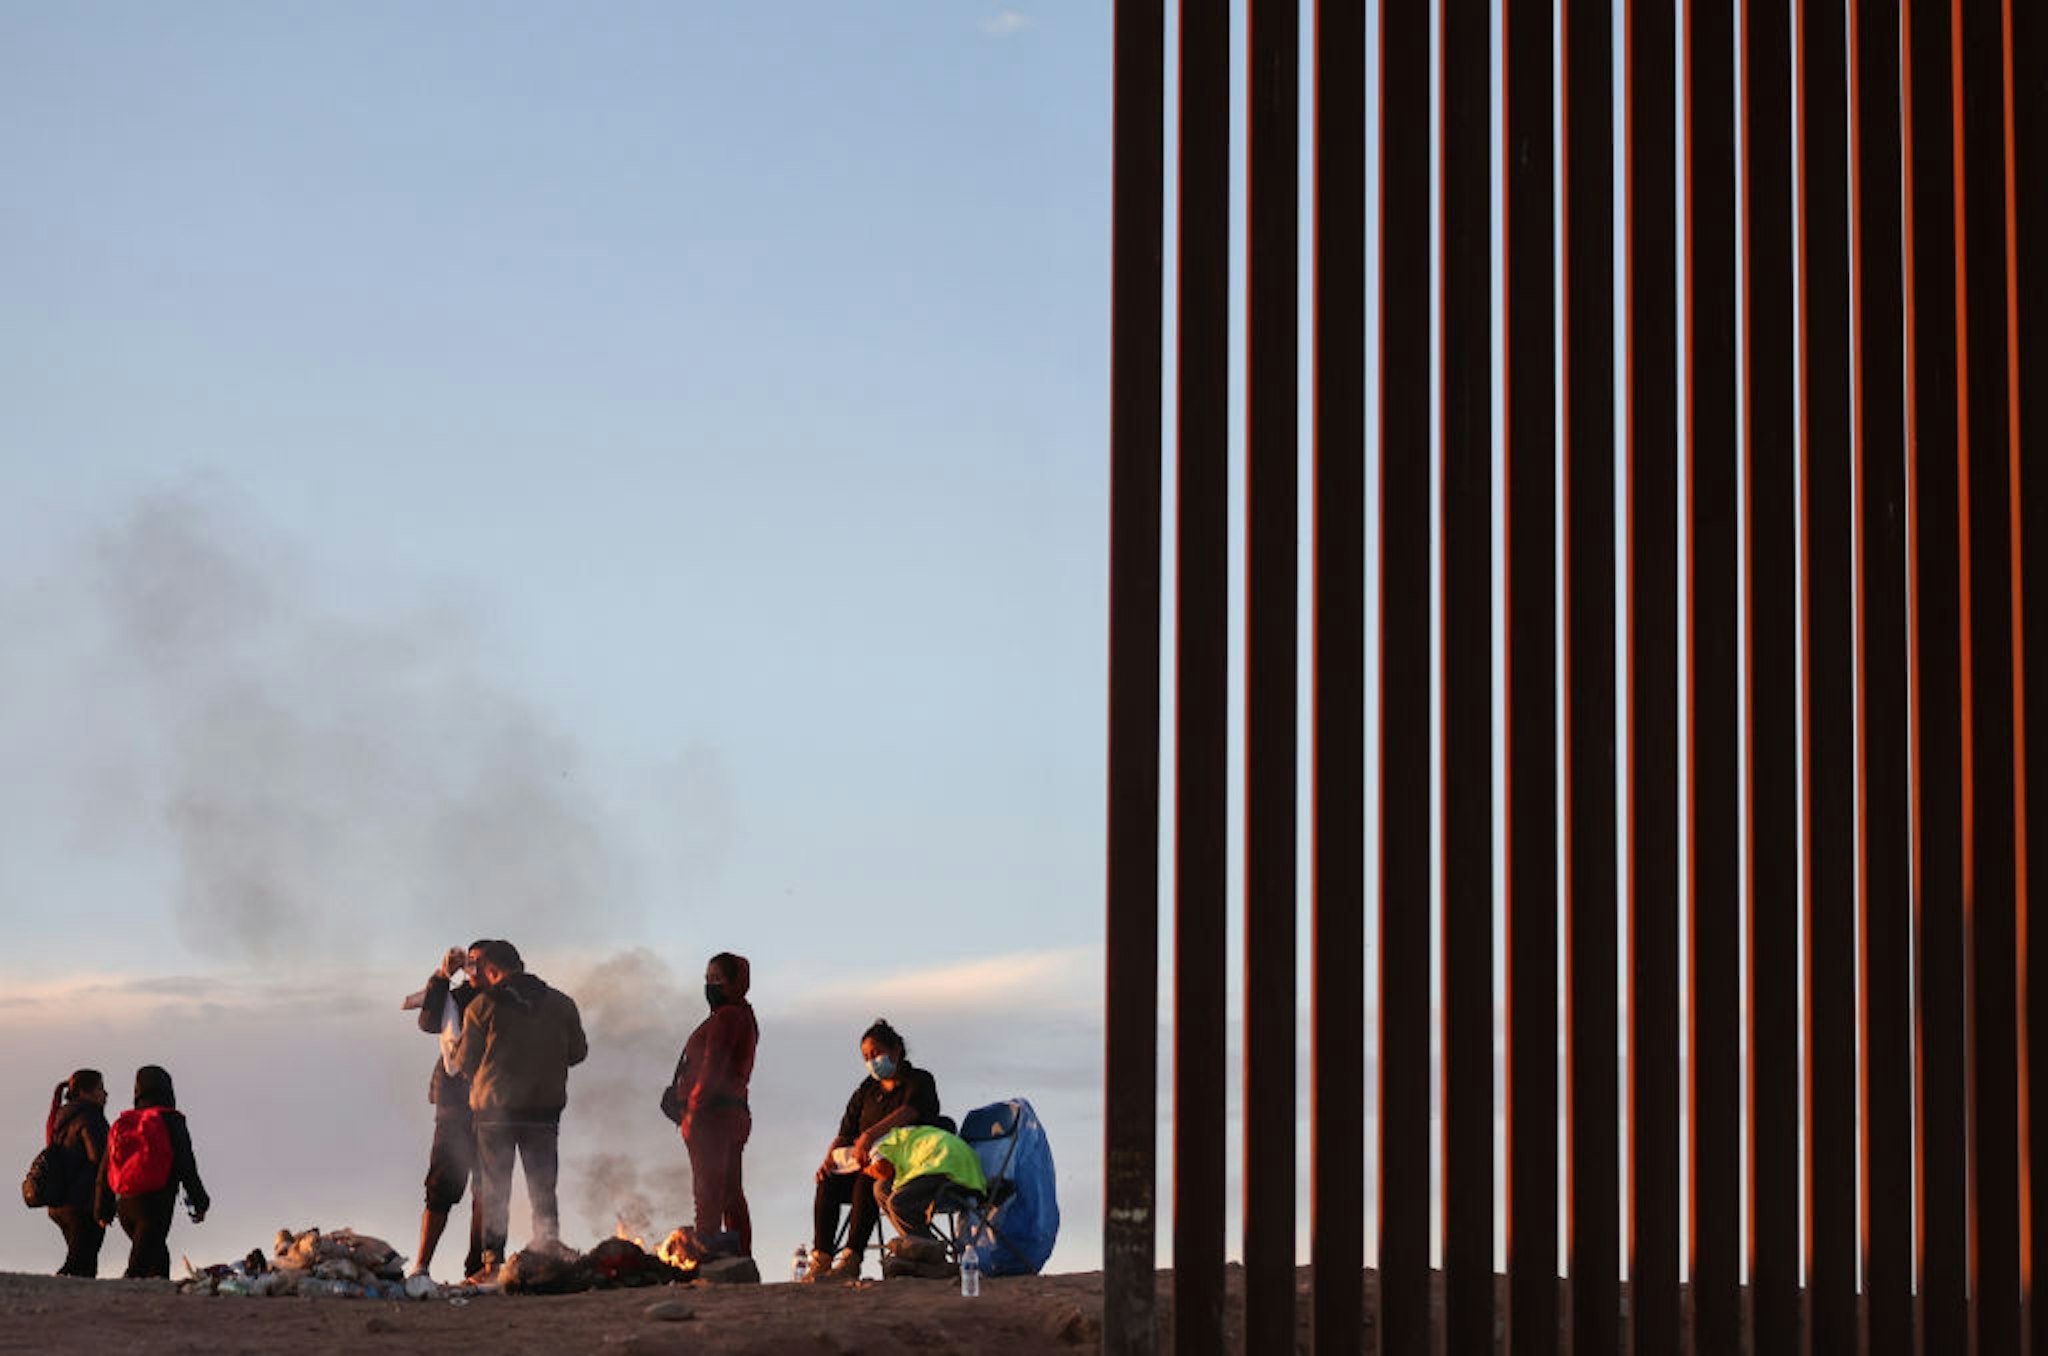 YUMA, ARIZONA - MAY 22: Immigrants from Ecuador warm themselves by a fire after sunrise along a gap in the U.S.-Mexico border barrier, as they await processing by the U.S. Border Patrol, after crossing from Mexico on May 22, 2022 in Yuma, Arizona. Title 42, the controversial pandemic-era border policy enacted by former President Trump, which cites COVID-19 as the reason to rapidly expel asylum seekers at the U.S. border, was set to officially expire on May 23rd. A federal judge in Louisiana delivered a ruling May 20th blocking the Biden administration from lifting Title 42. (Photo by Mario Tama/Getty Images)